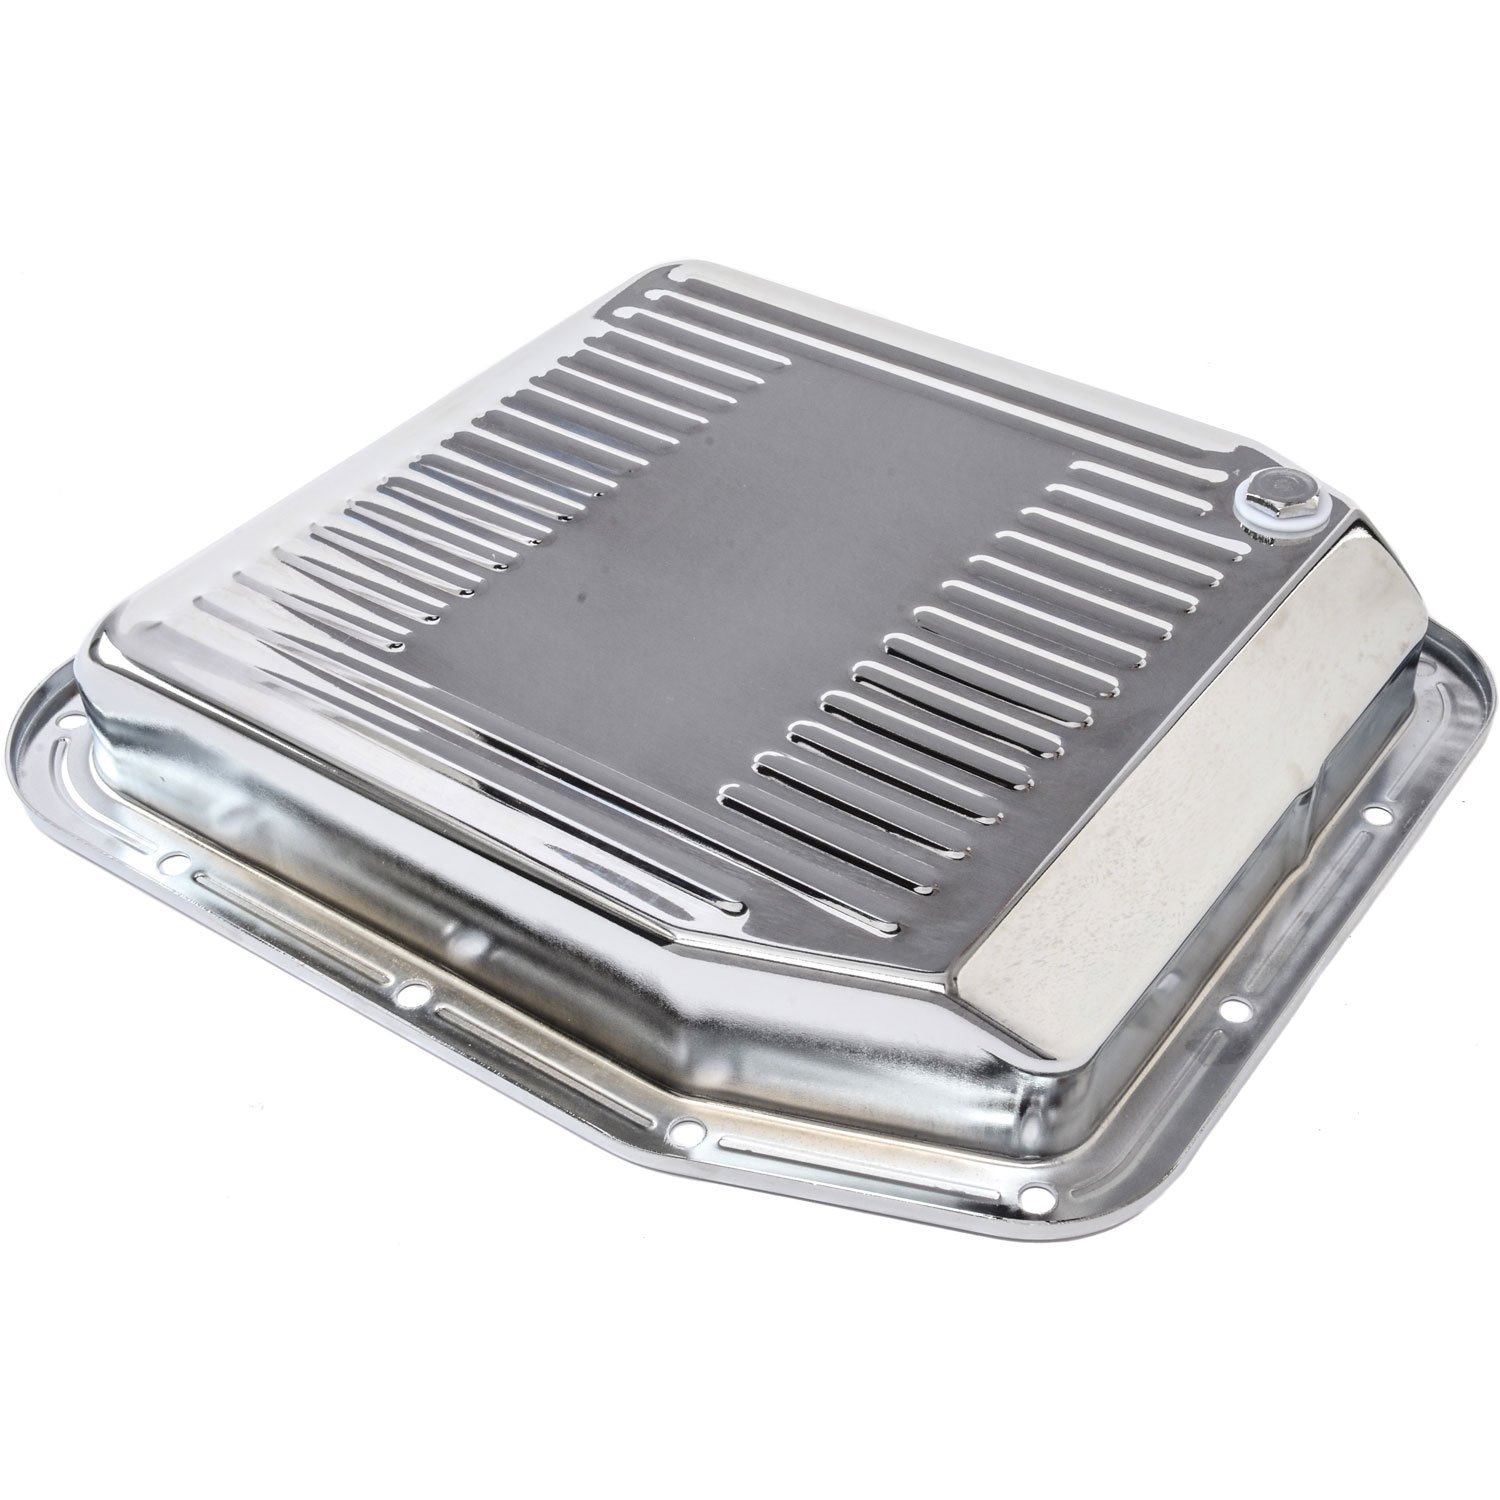 JEGS 60185: Automatic Transmission Pan | Fits Ford AOD Automatic  Transmissions | Ribbed Design | 16-gauge Steel | Chrome Plated Finish |  Includes Drain Plug - JEGS